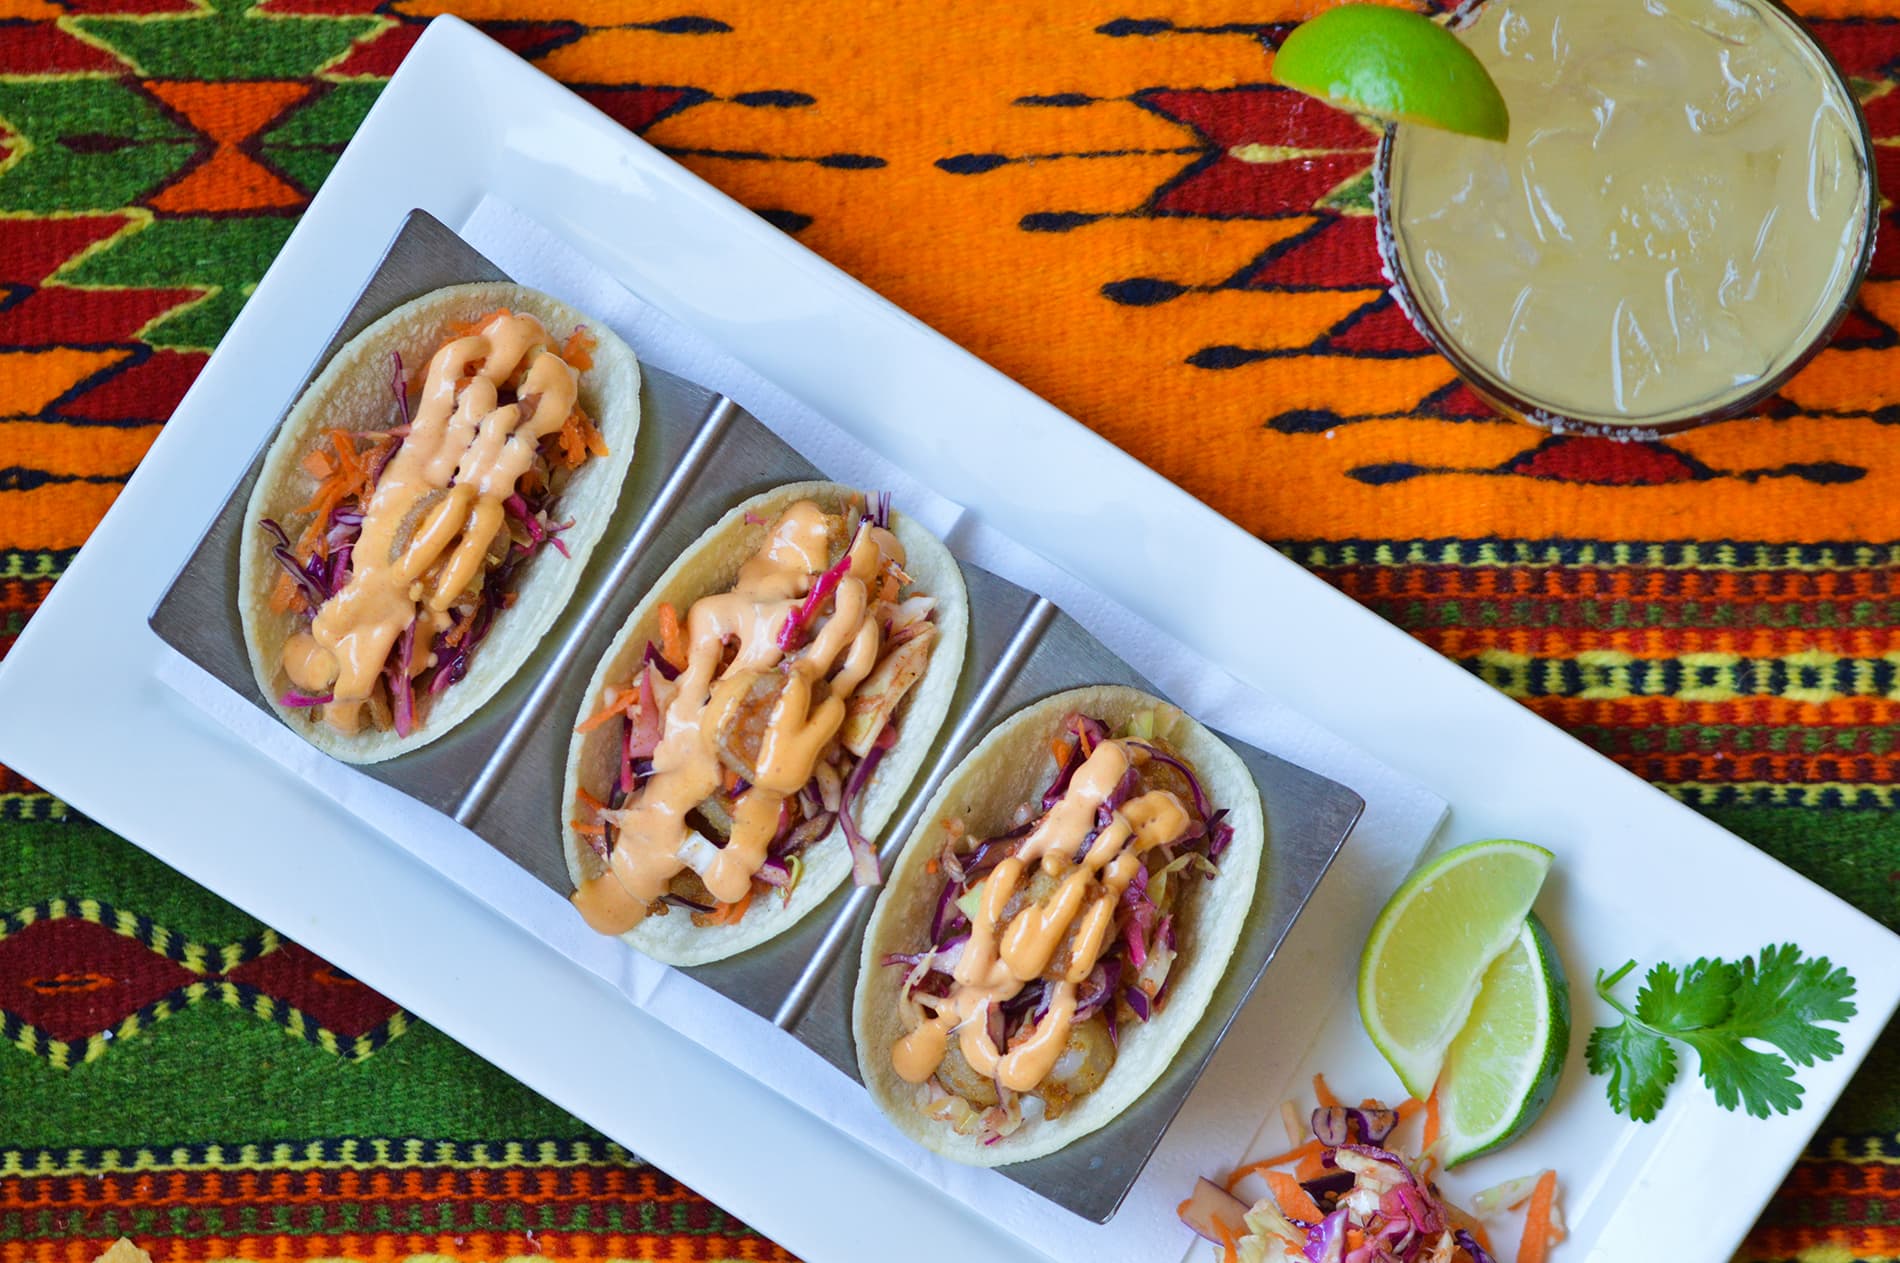 Shrimp tacos with a margarita on a colorful Mexican blanket.